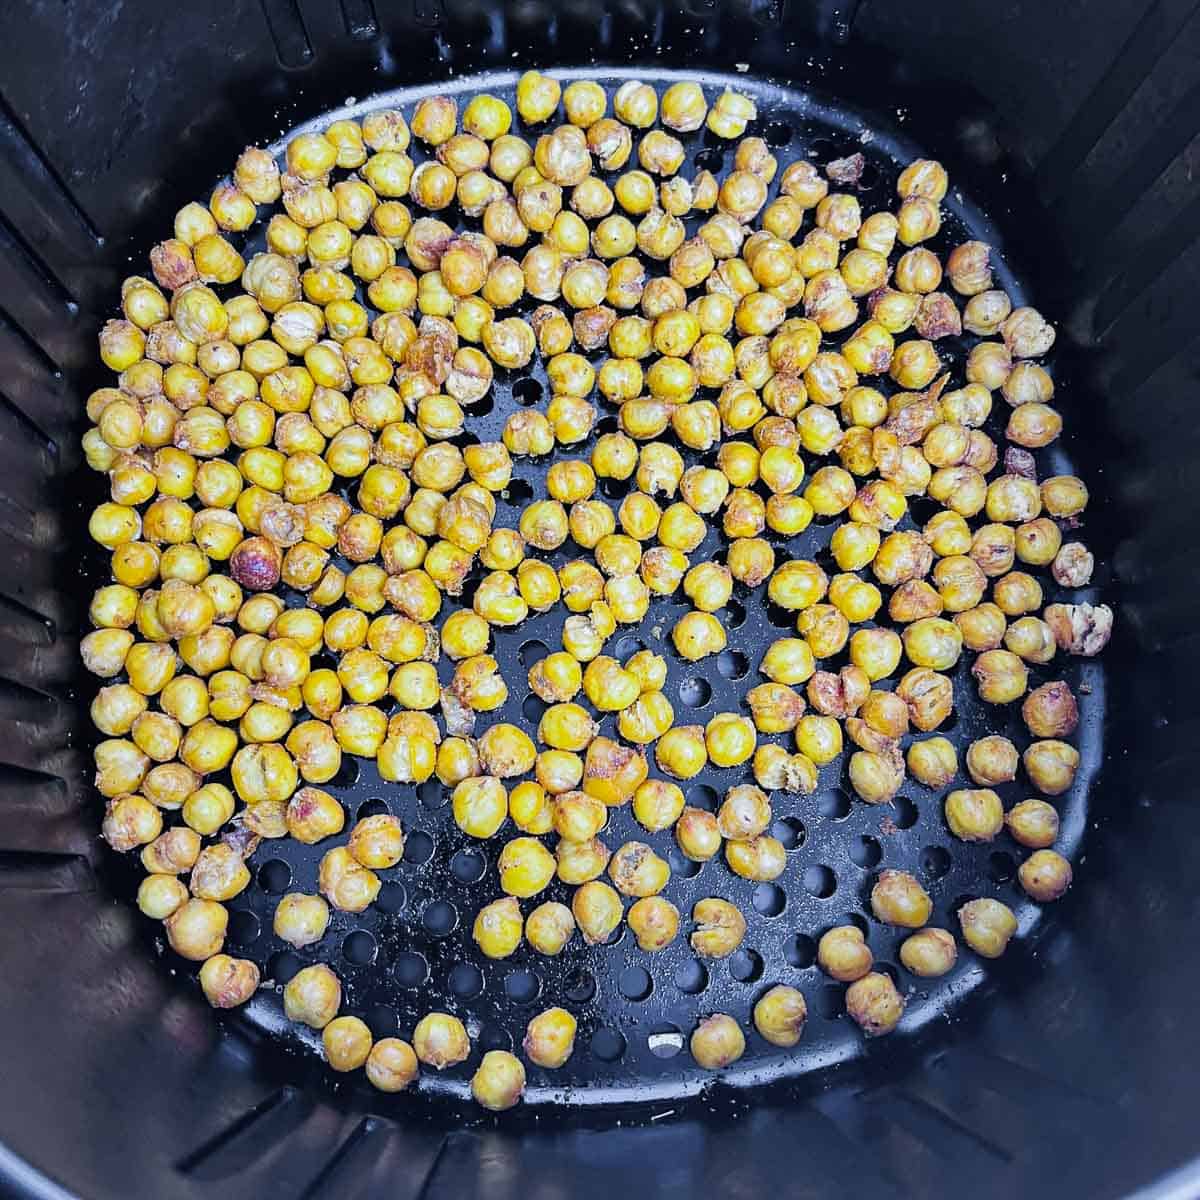 Cooked chickpeas seasoned and roasted in the air fryer.